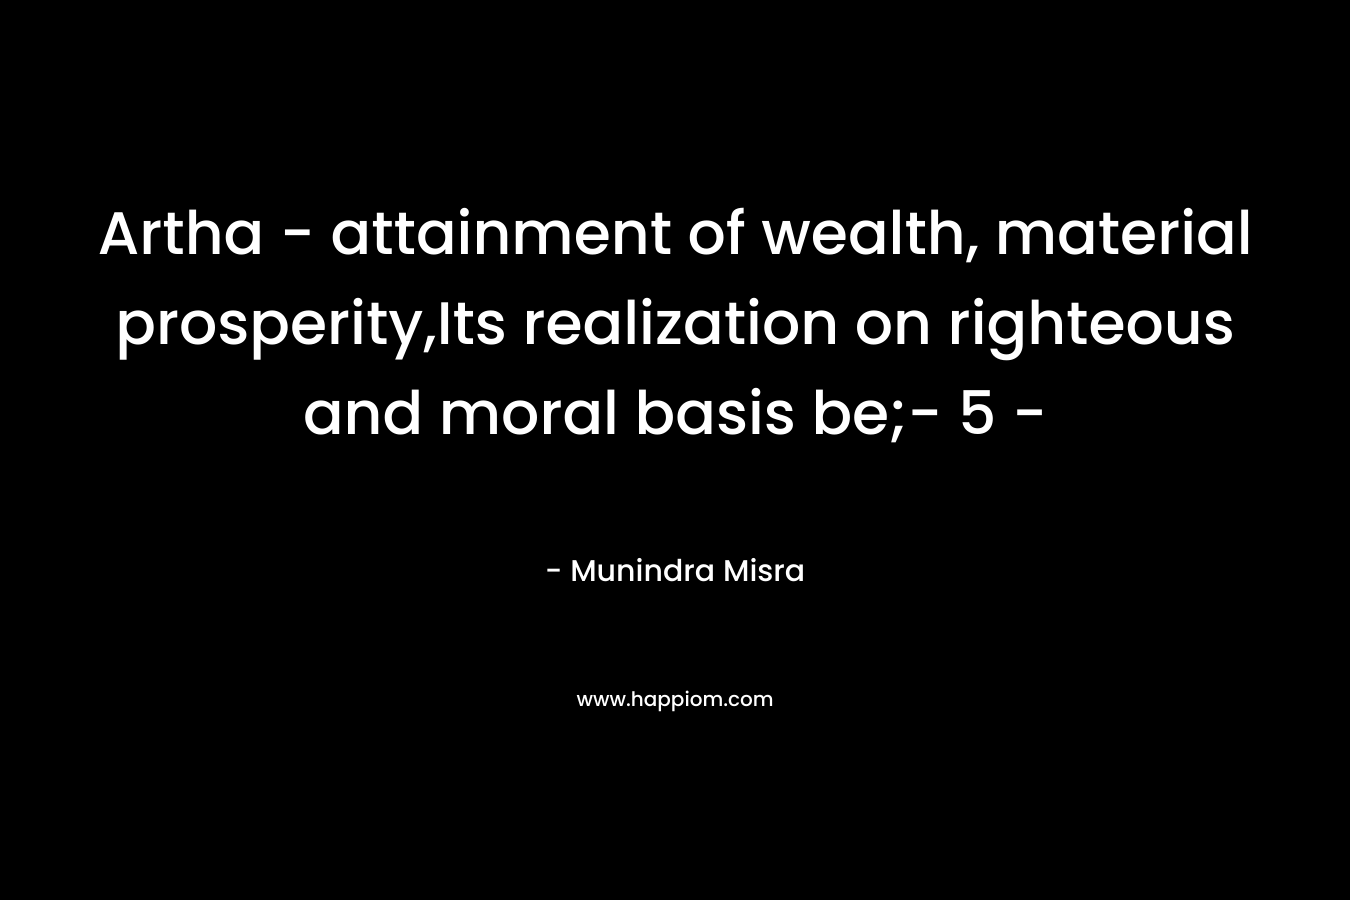 Artha - attainment of wealth, material prosperity,Its realization on righteous and moral basis be;- 5 -